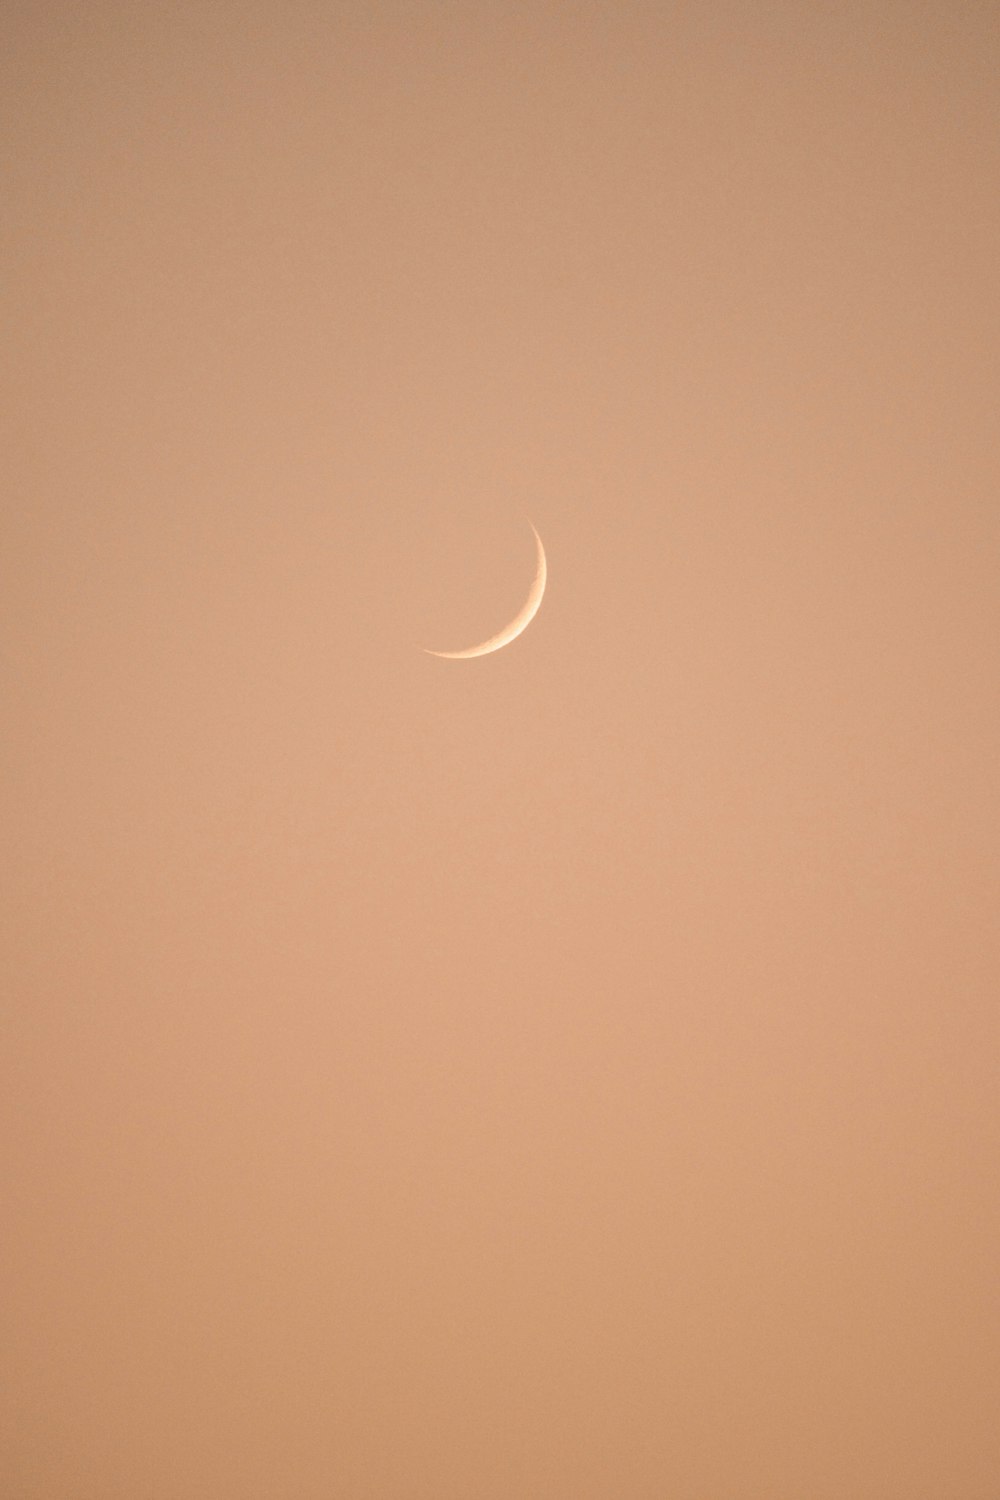 a crescent moon in the sky